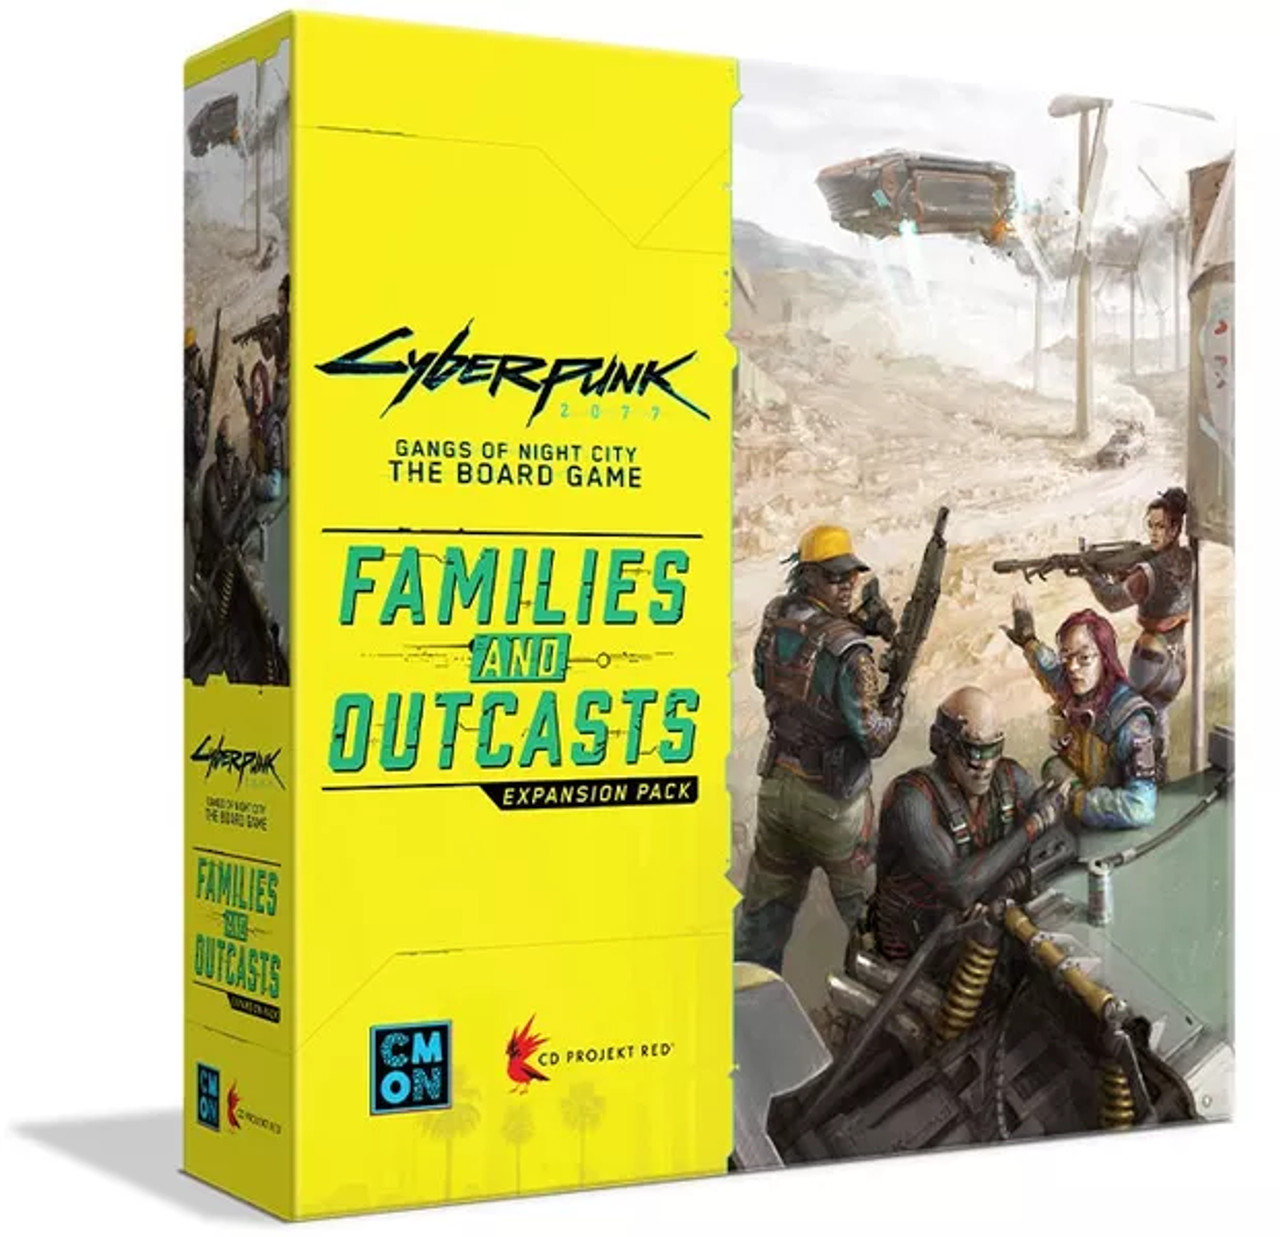 CYBERPUNK 2077 GANGS OF NIGHT CITY FAMILIES & OUTCASTS